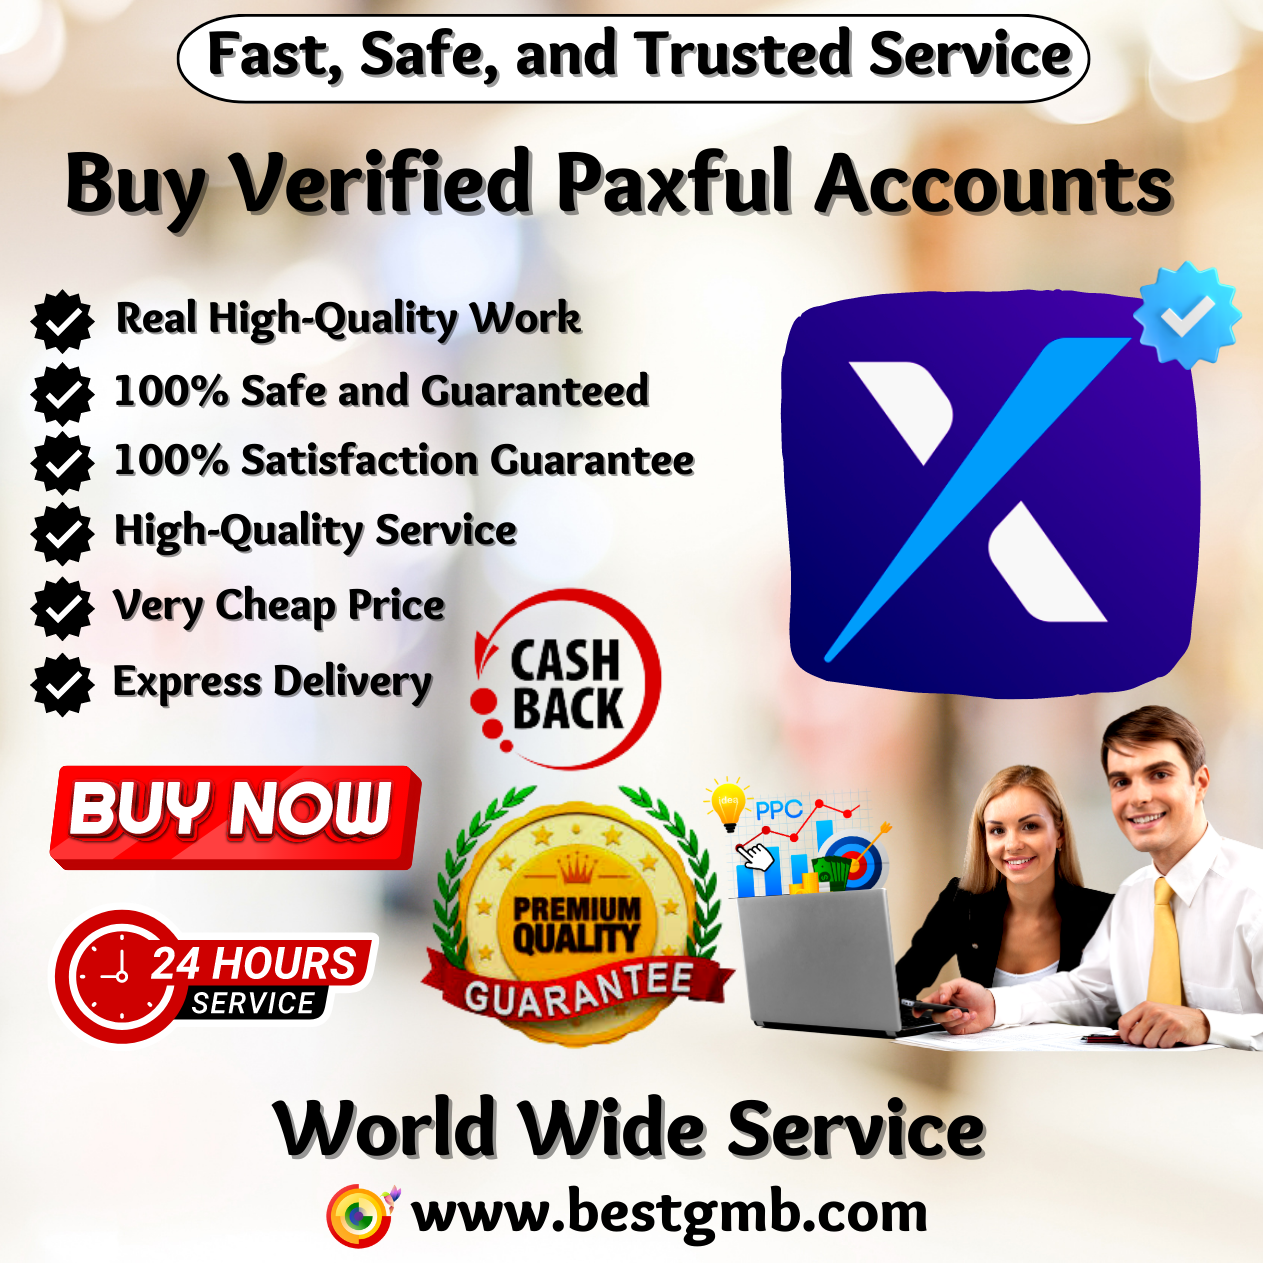 Buy Verified Paxful Account - 100% Safe And Verified